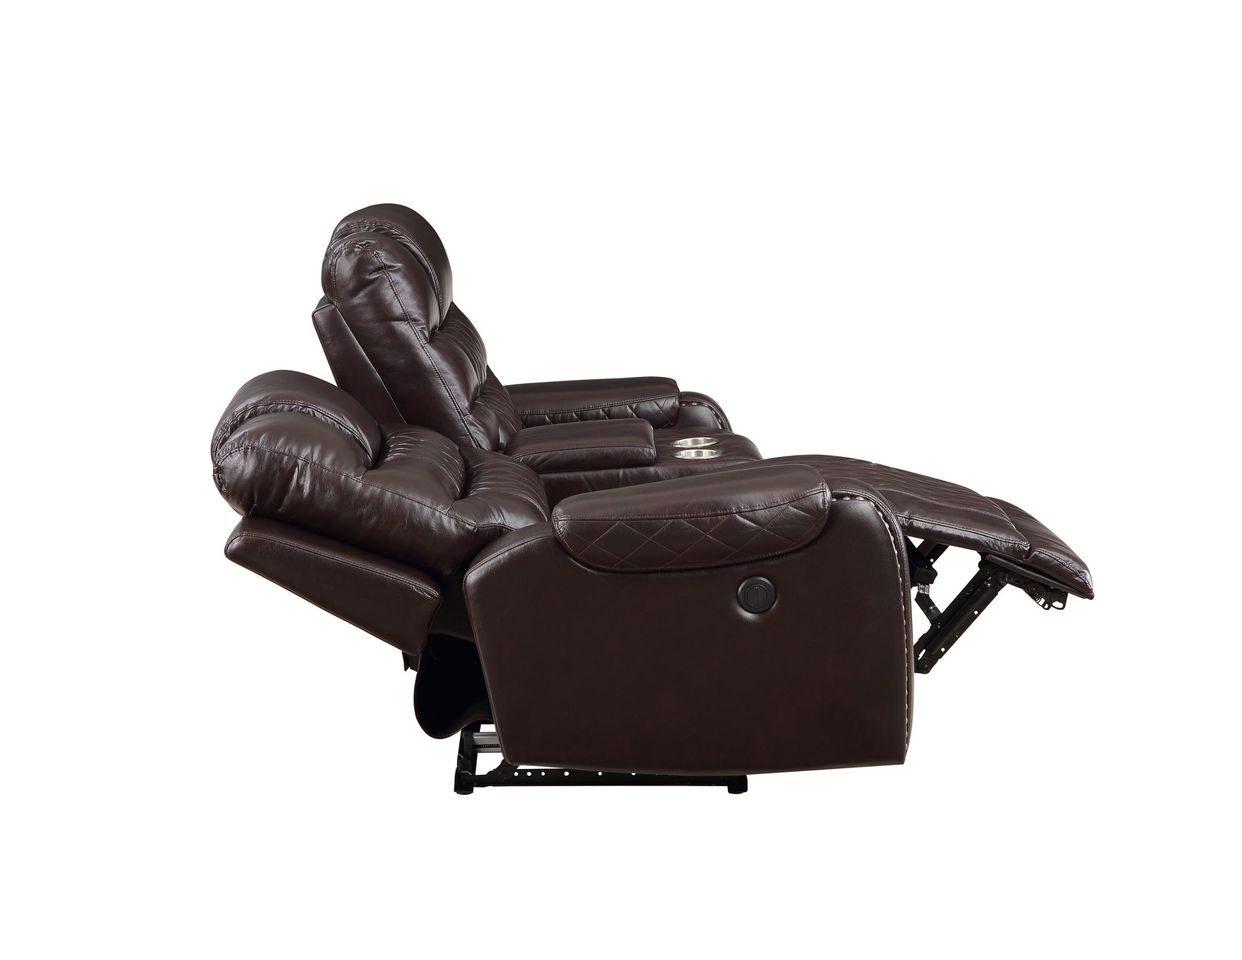 

    
ESPRESSO Eco Leather Power Recliner Sofa TENNESSEE Galaxy Home Contemporary
